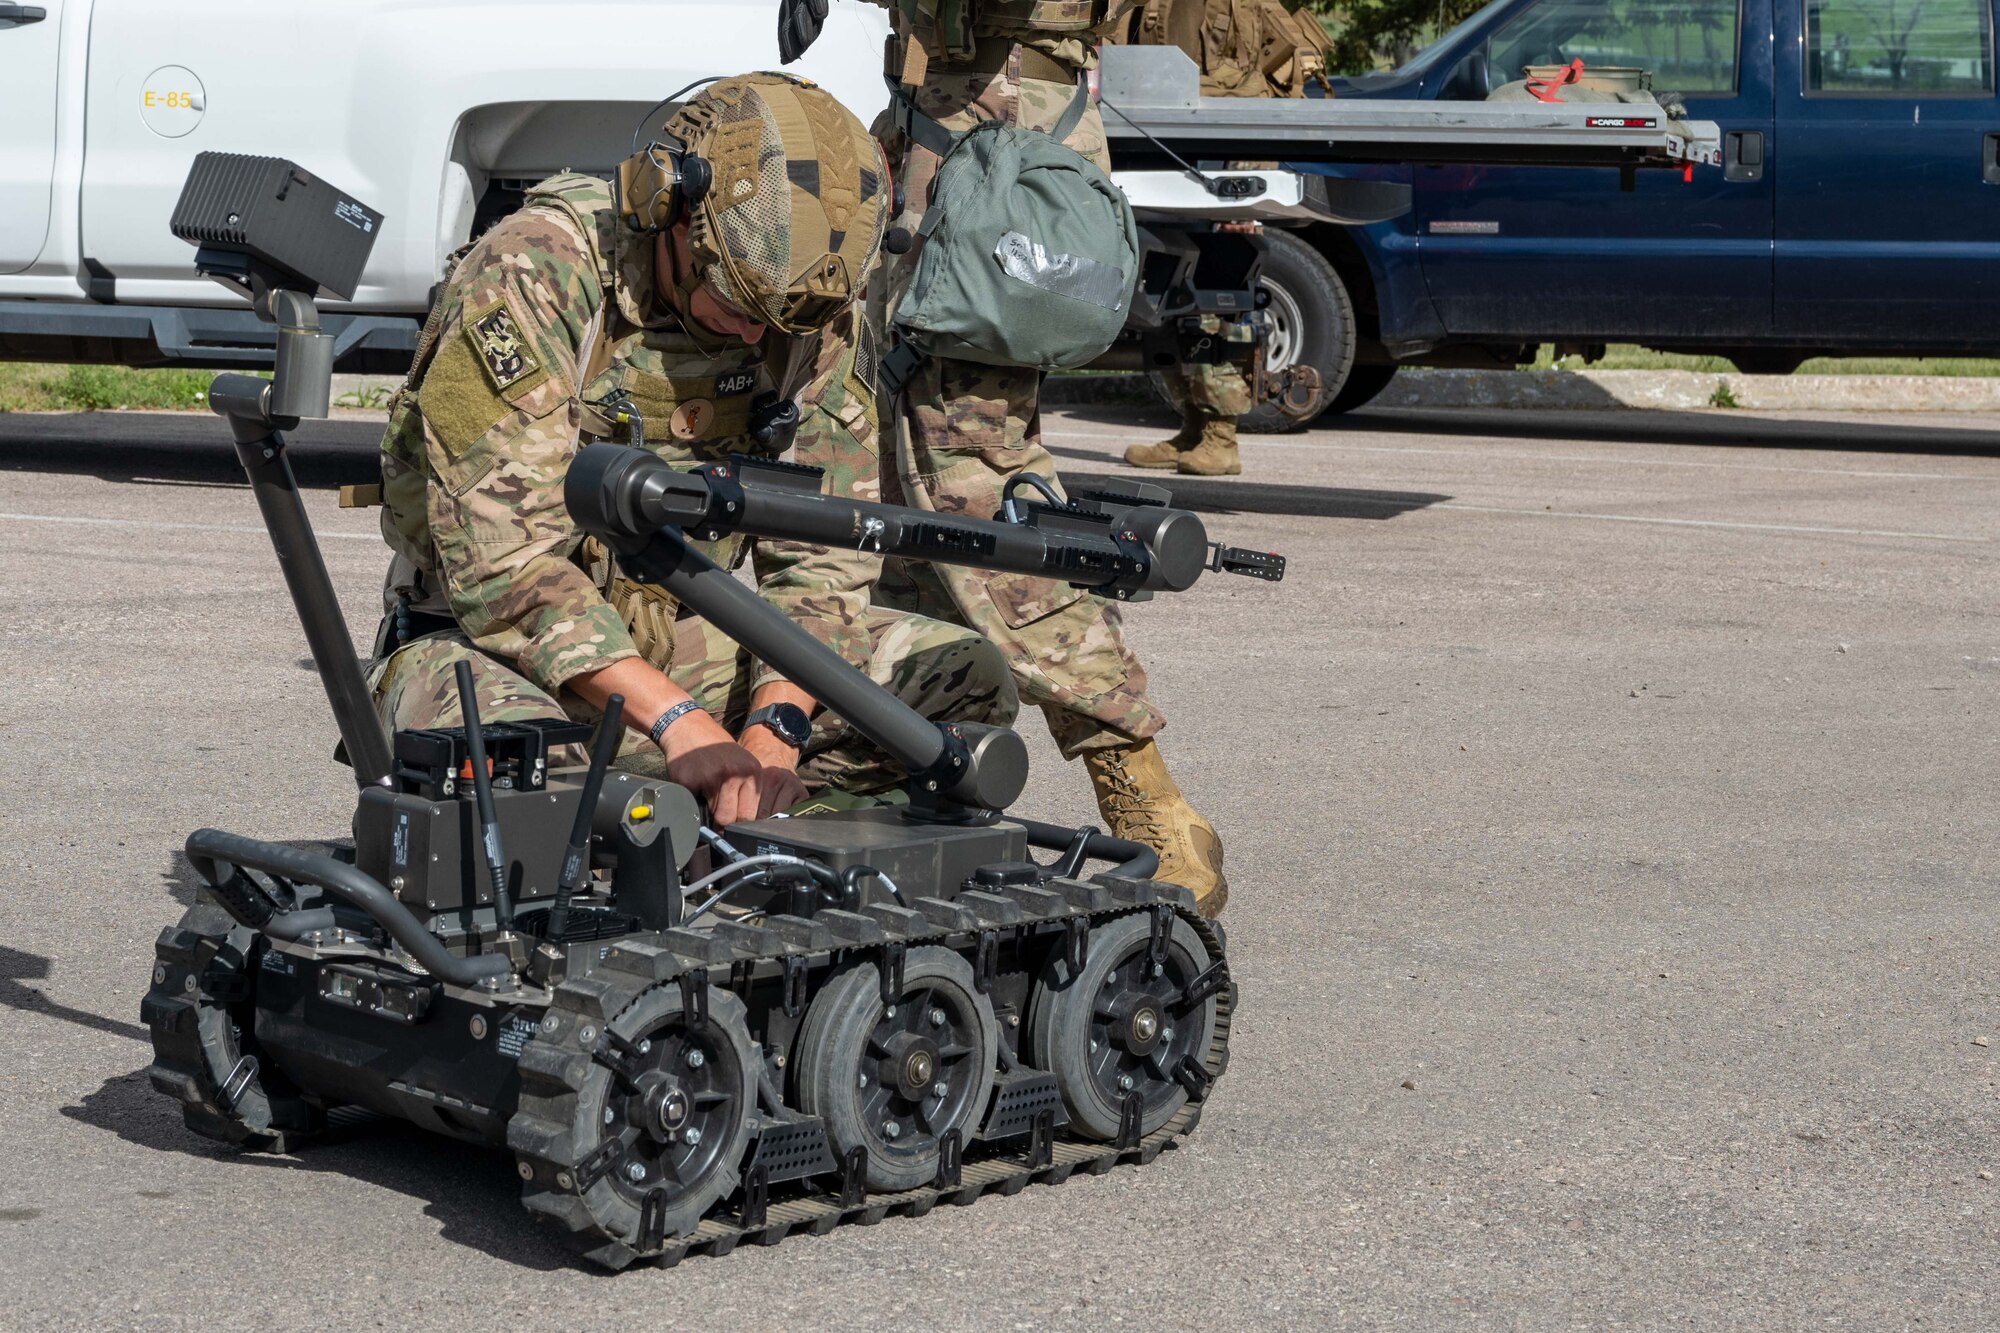 An Airman with the 28th Civil Engineering Squadron, explosives ordinance disposal flight, prepares a remote-control robot to survey for threats before personnel enter an area on Ellsworth Air Force Base, South Dakota, July 25, 2023. Robots are utilized to locate and identify explosive threats without endangering the lives of Airmen. (U.S. Air Force photo by Specialist 3 Adam Olson)